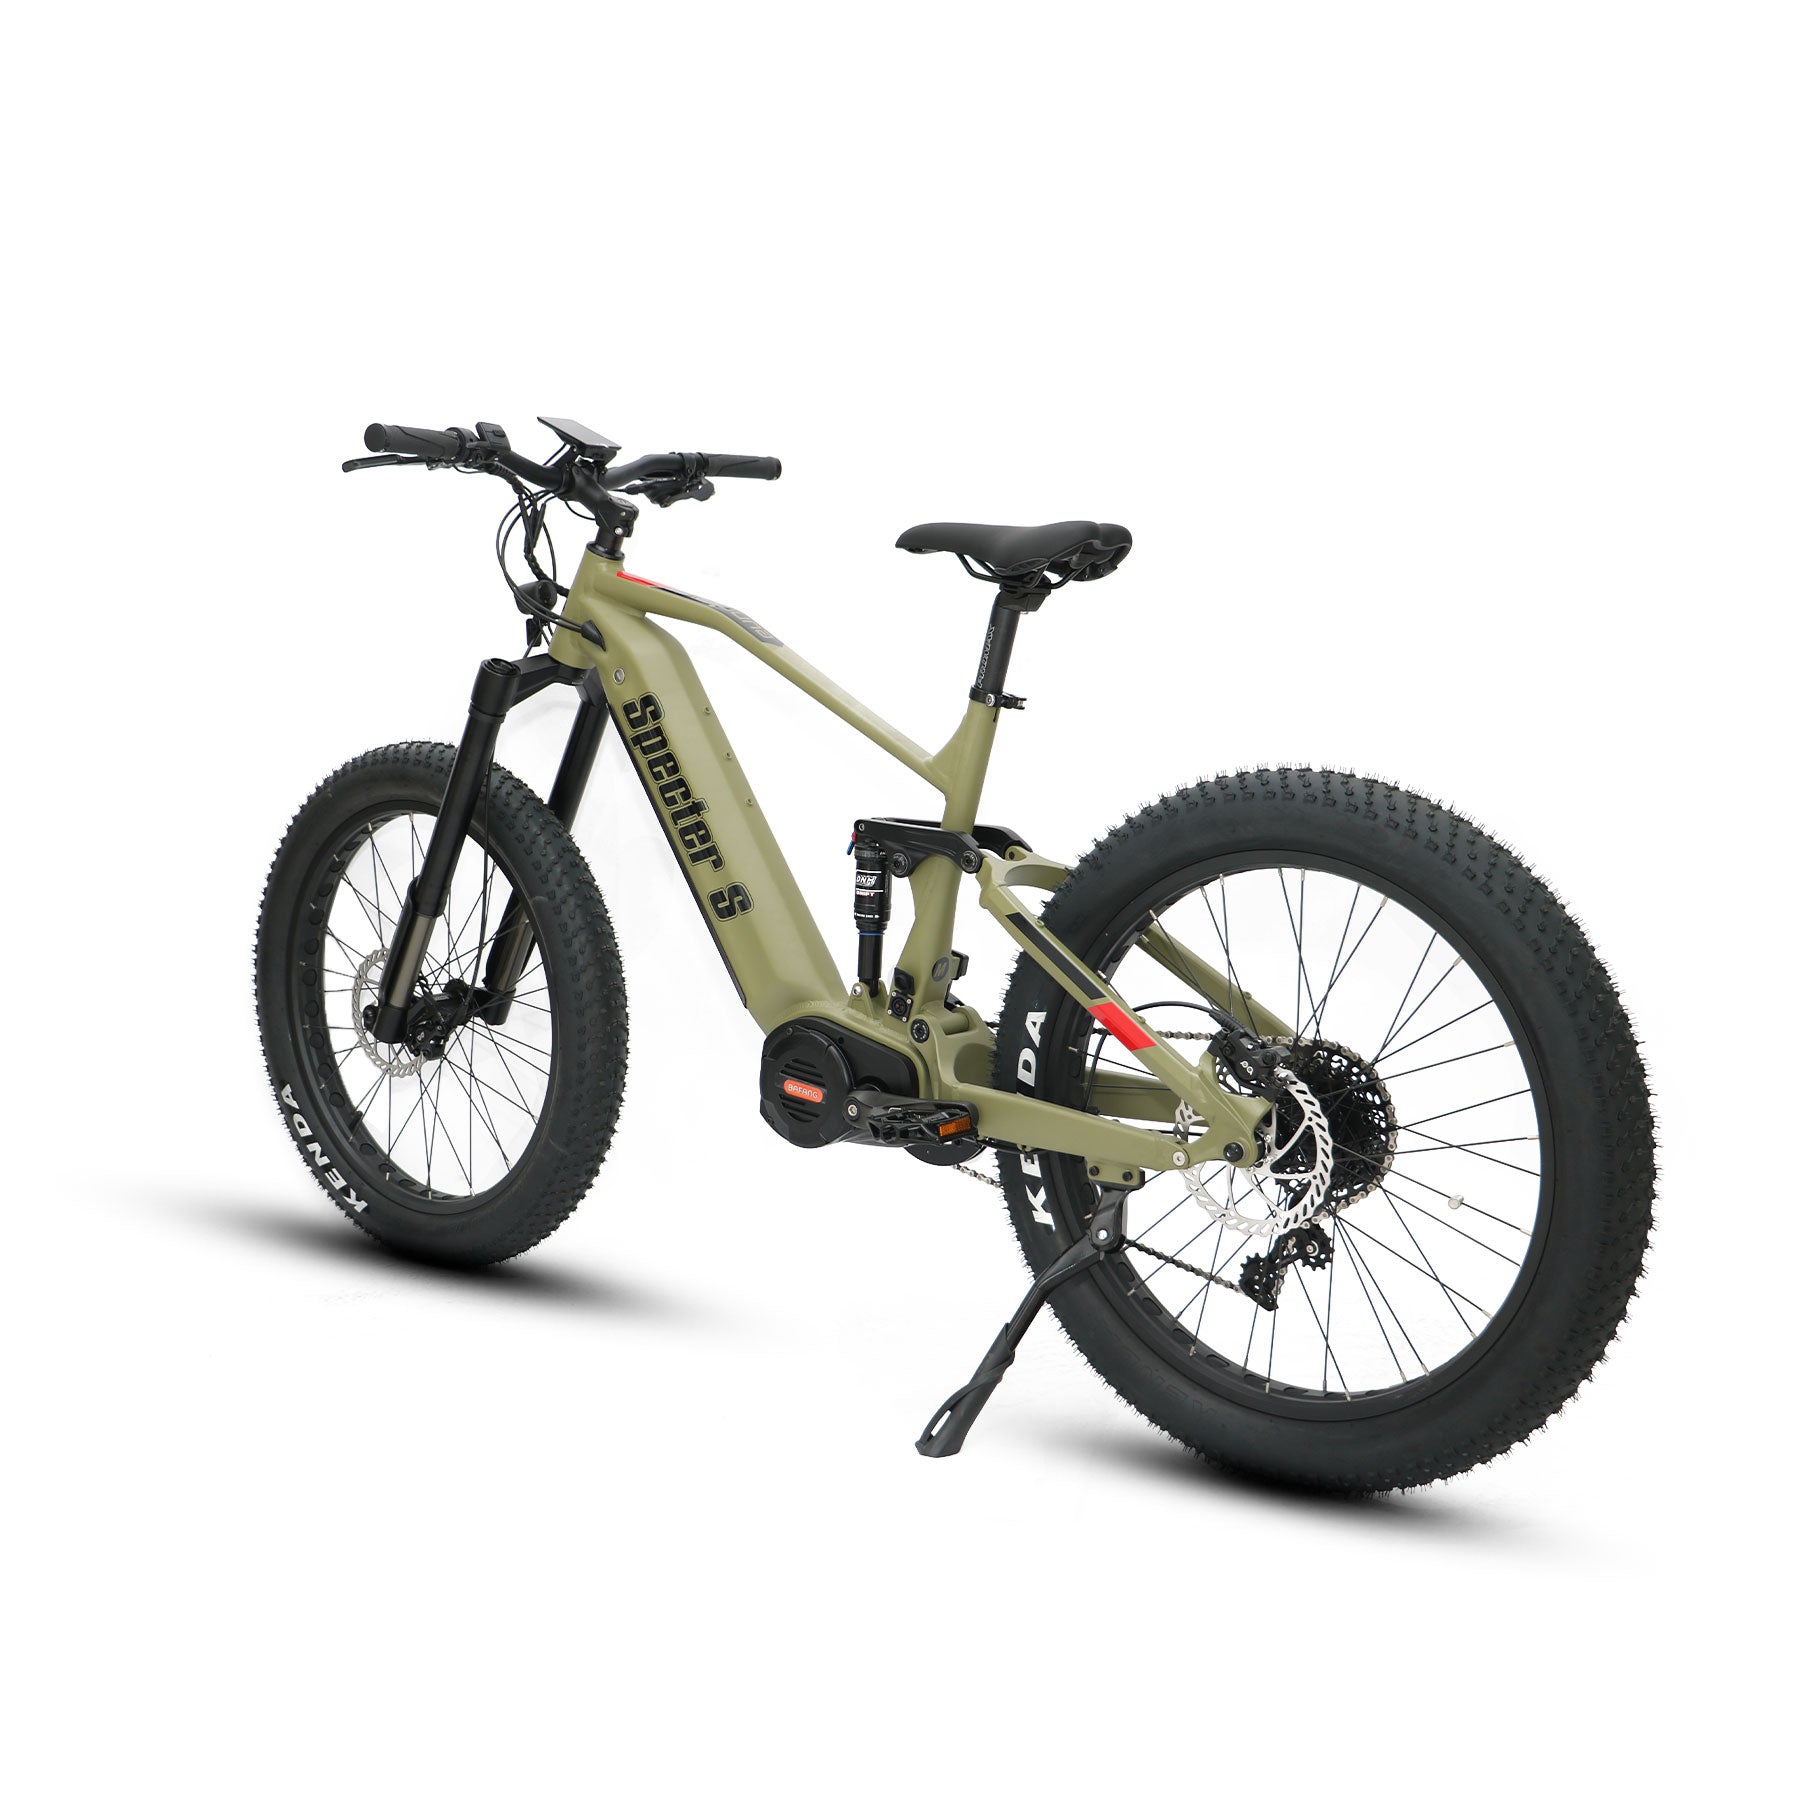 Rear angled profile of the Eunorau Specter S dual suspension electric mountain bike in army green colour. Fat tyre mid-drive bike against a white background.